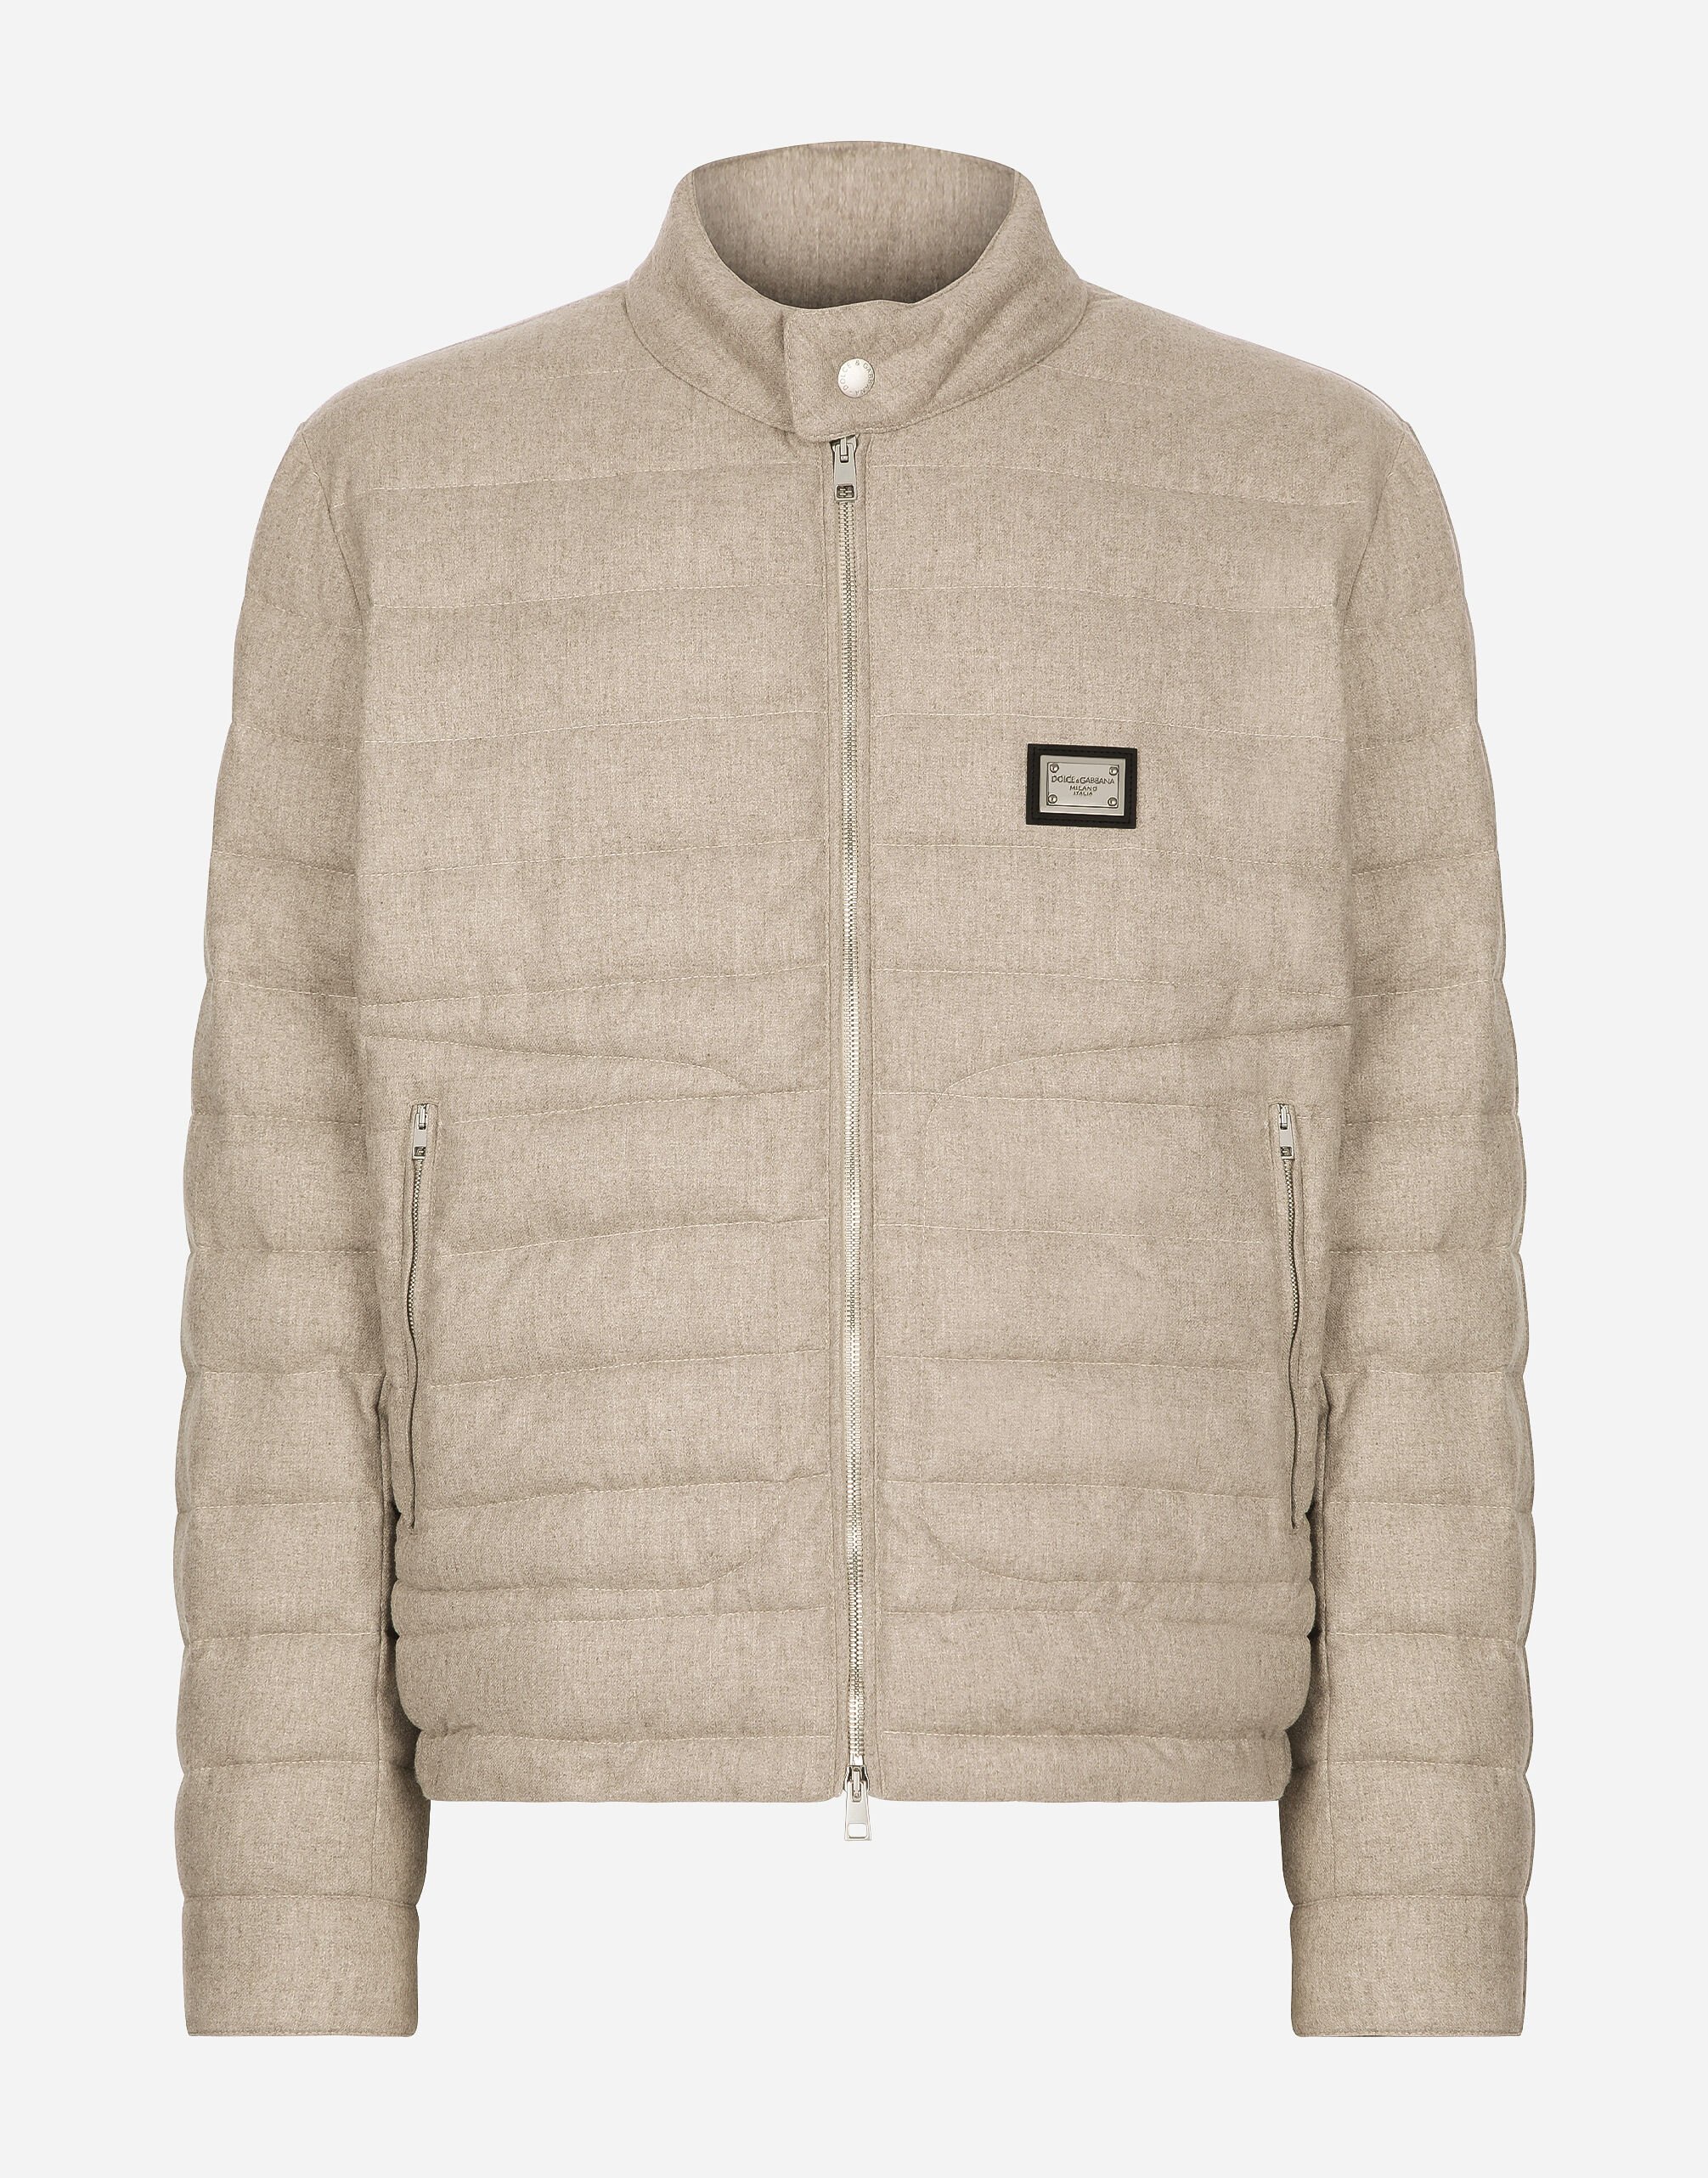 Dolce & Gabbana Quilted cashmere jacket White G9BFRTHUMQ4